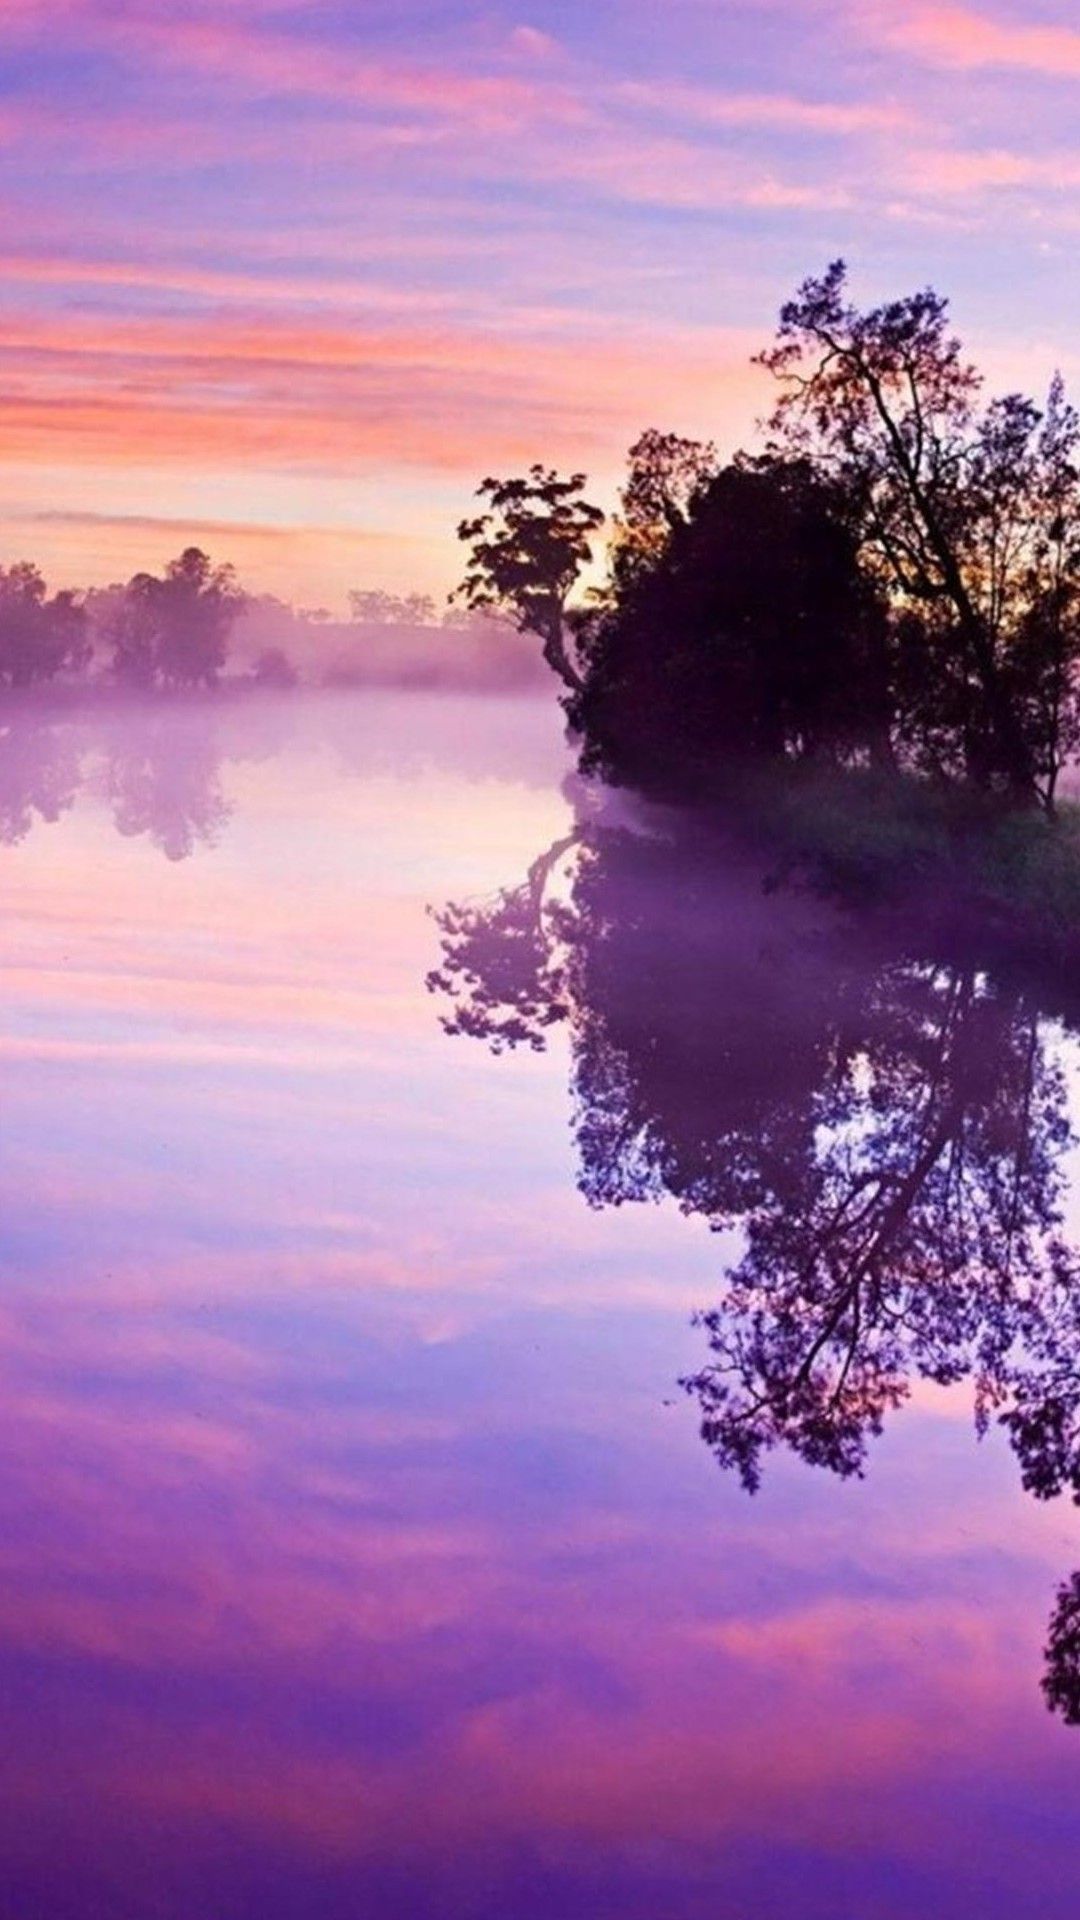 A sunset over the water with fog - Purple, nature, scenery, river